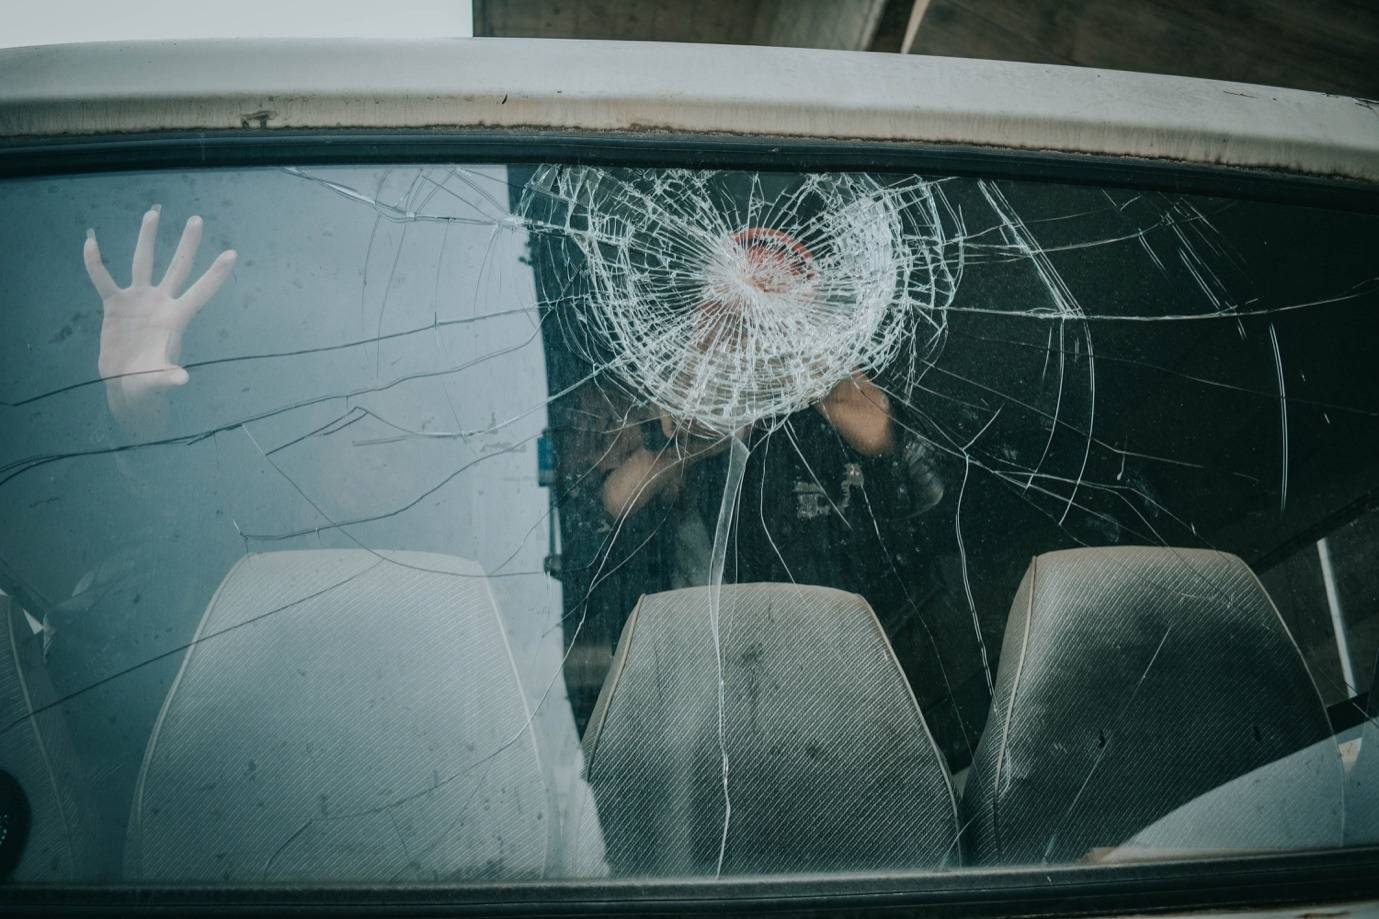 A cracked car windshield